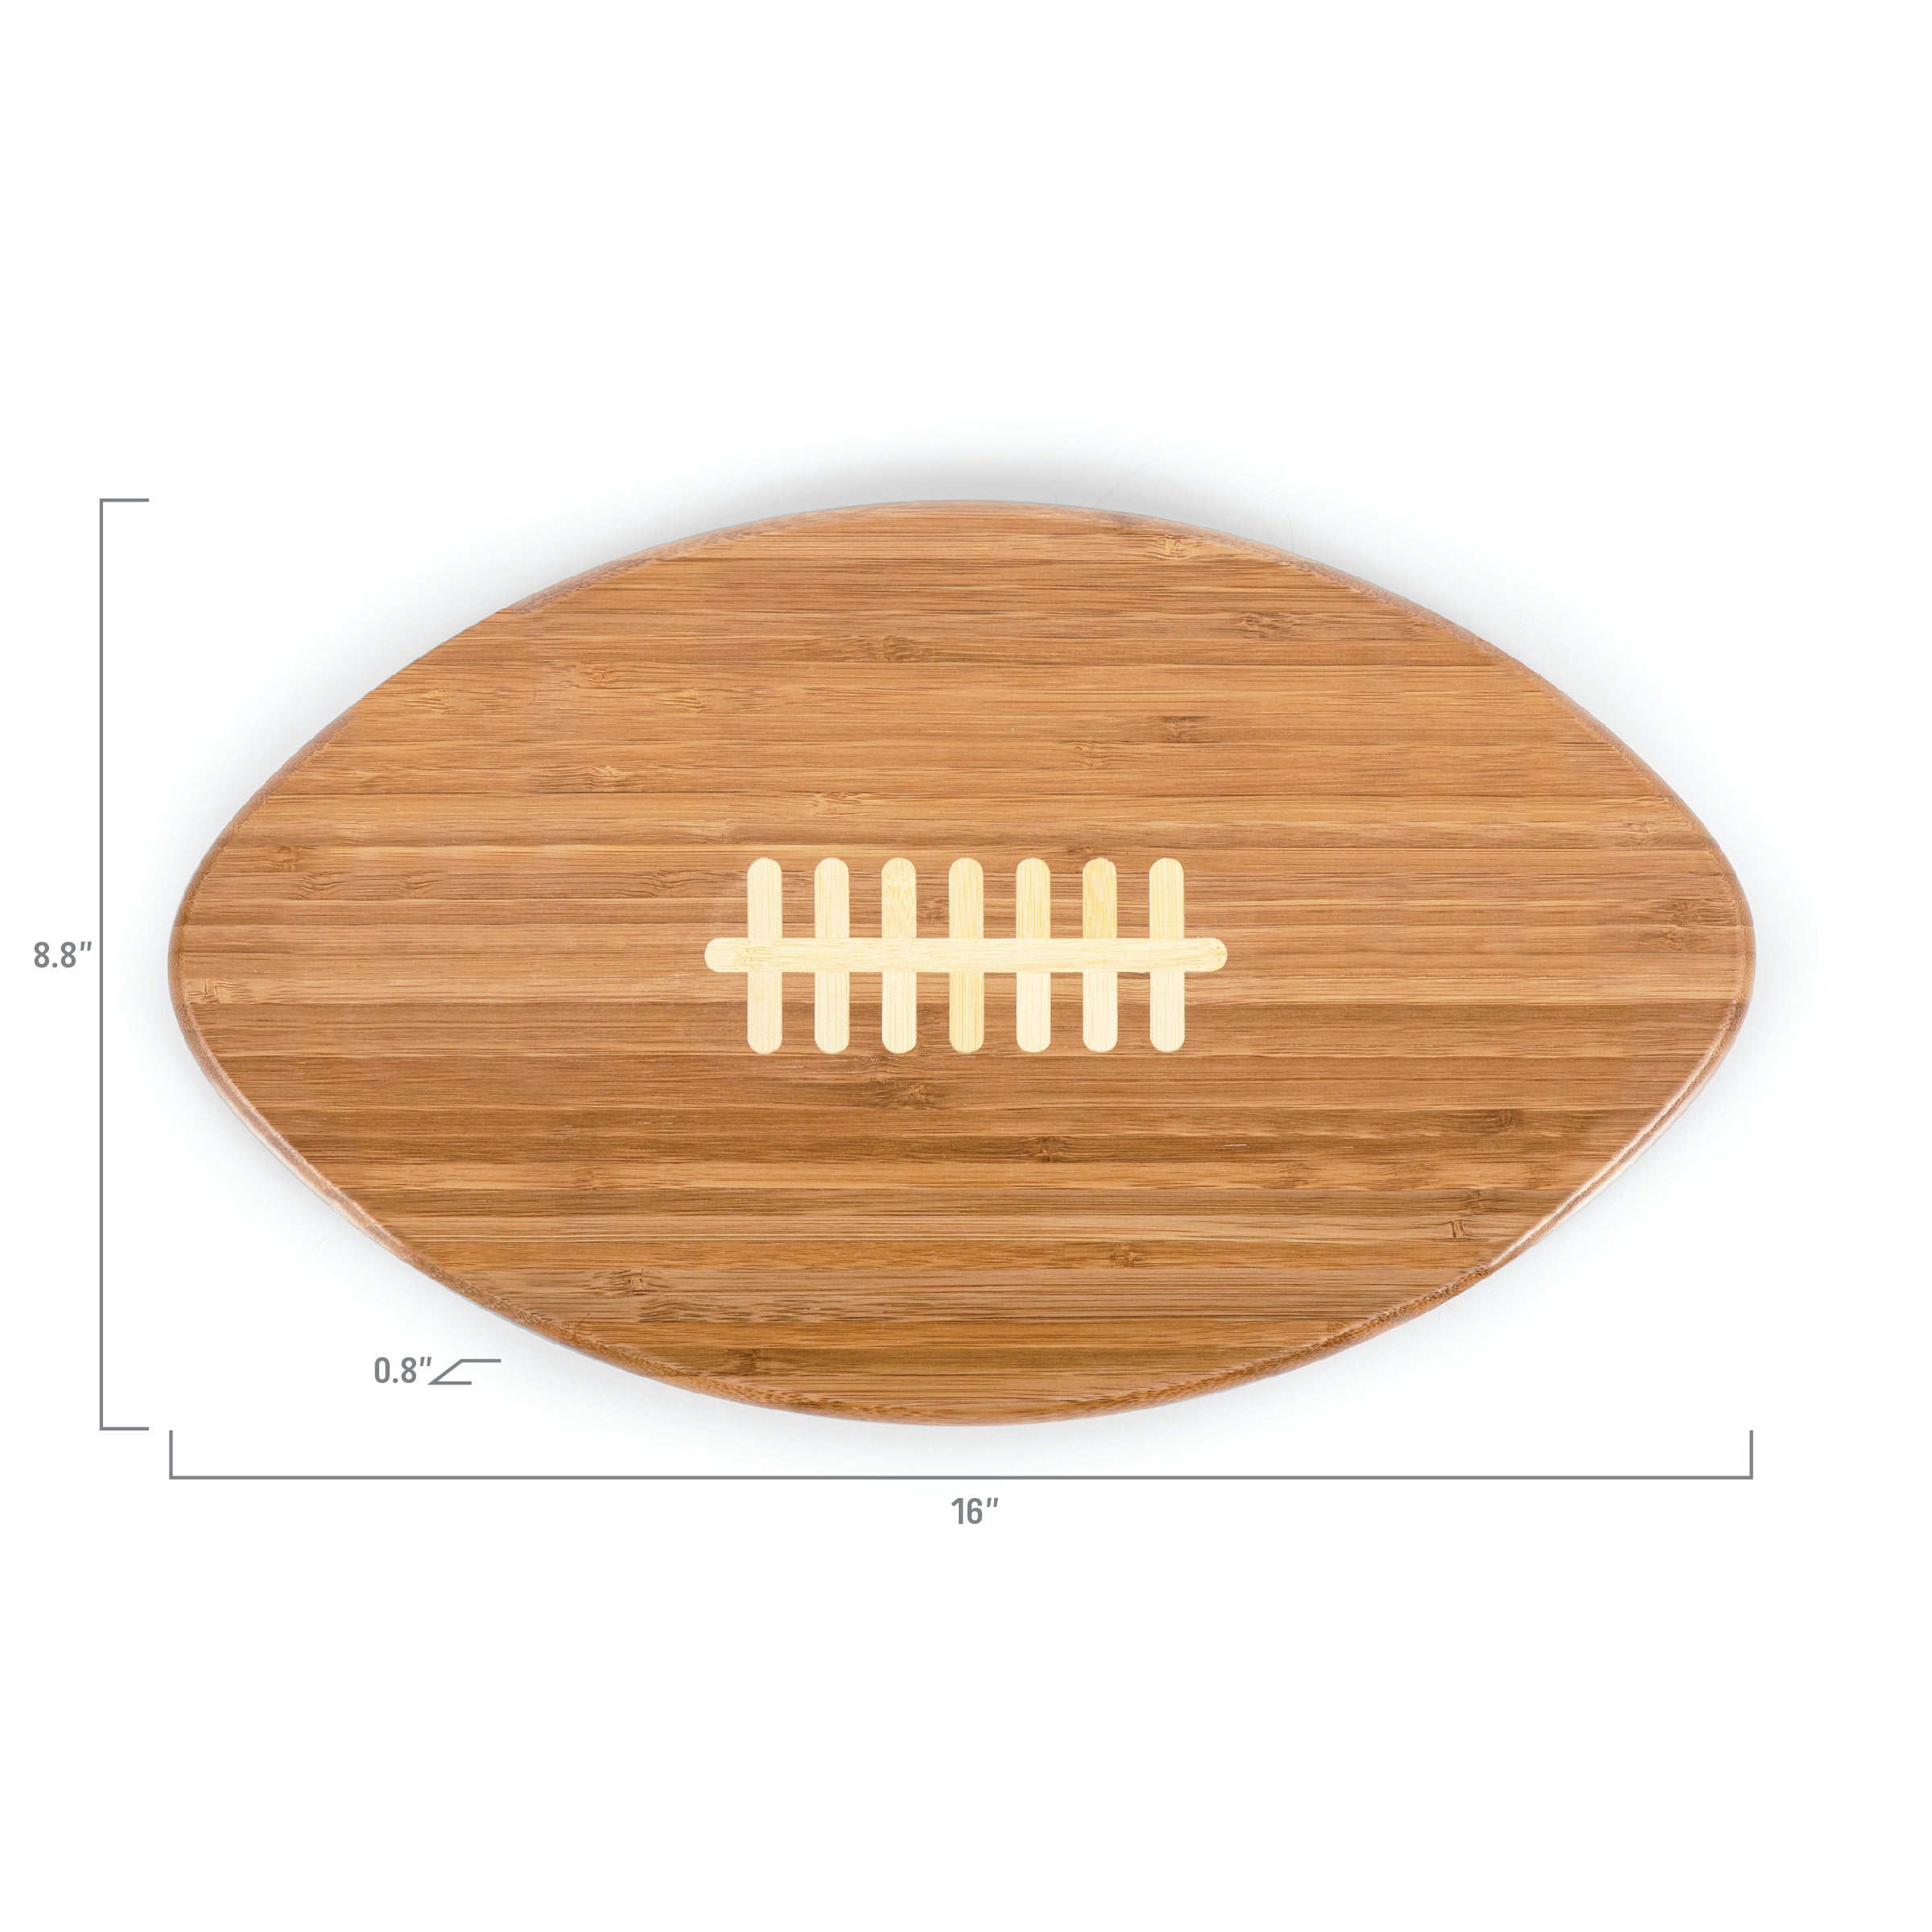 Kansas City Chiefs Mickey Mouse - Touchdown! Football Cutting Board & Serving Tray